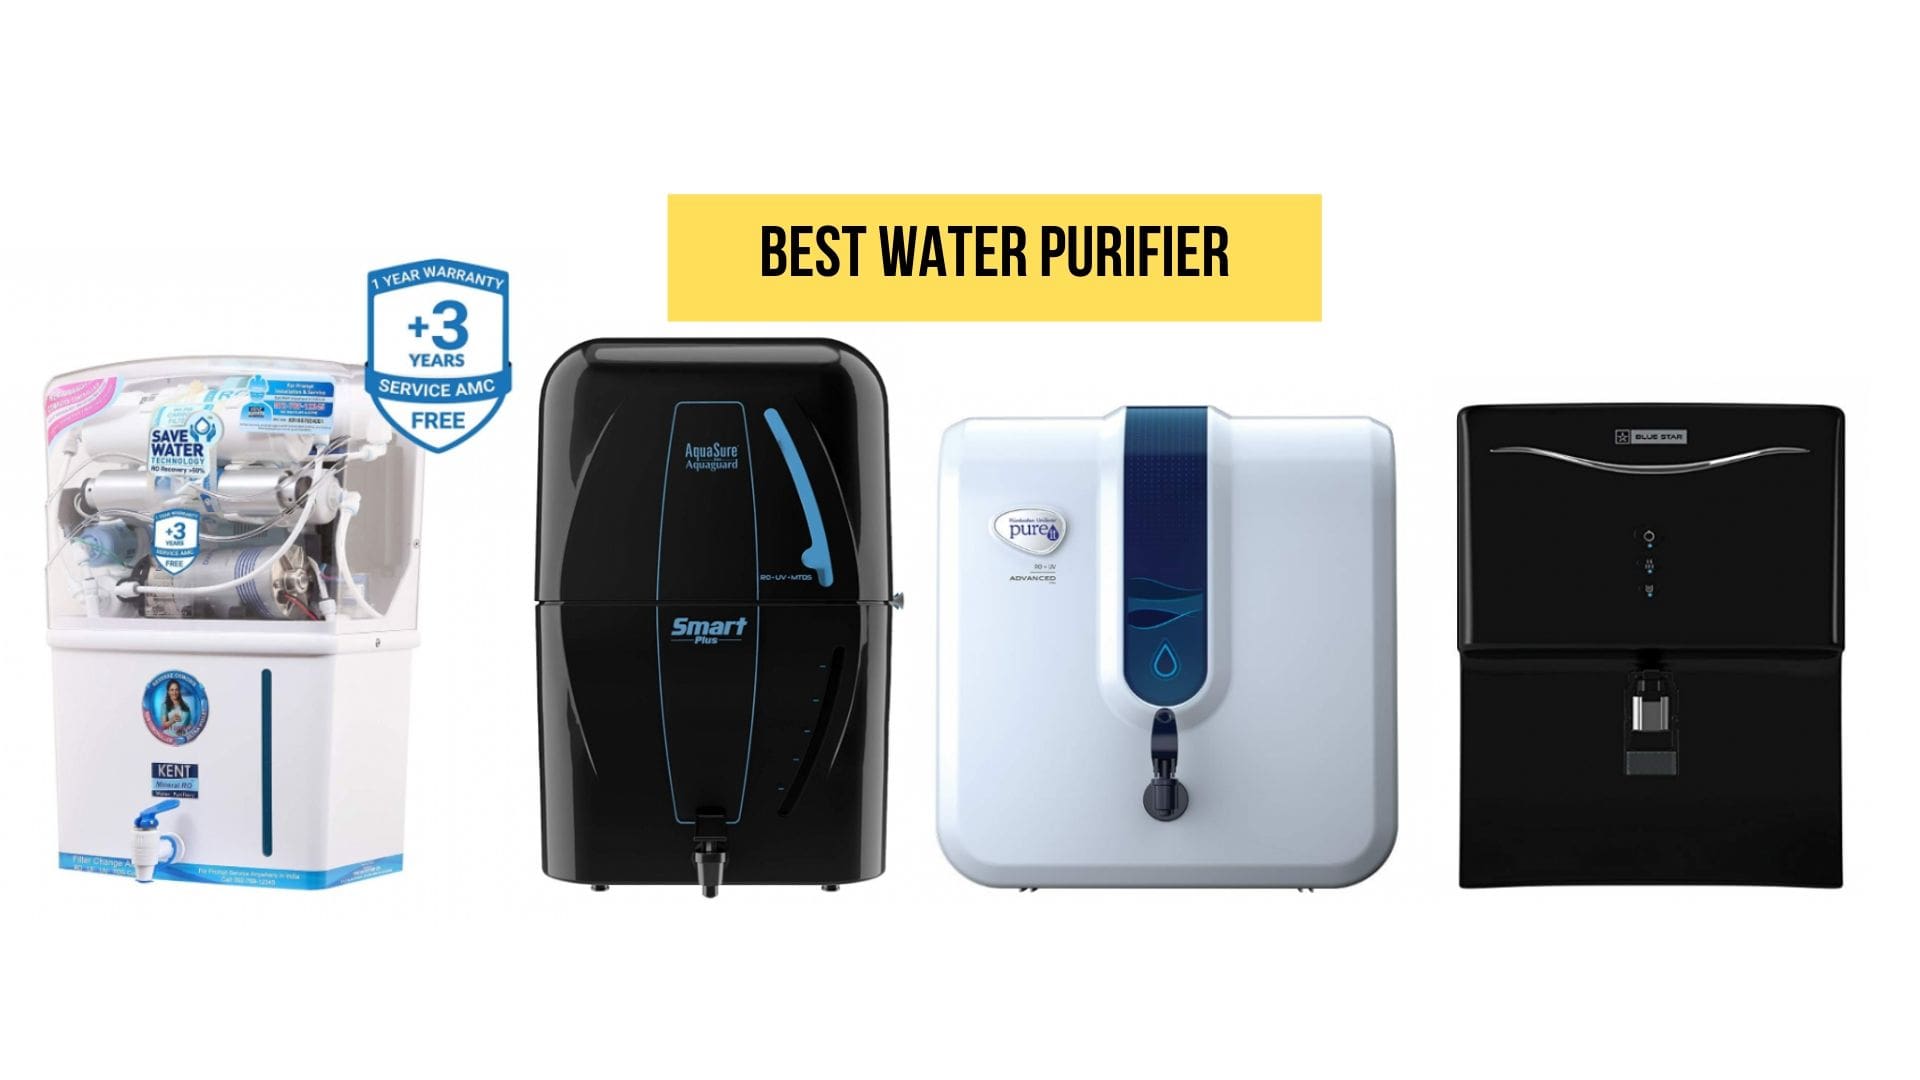 best aquaguard water purifier for home use